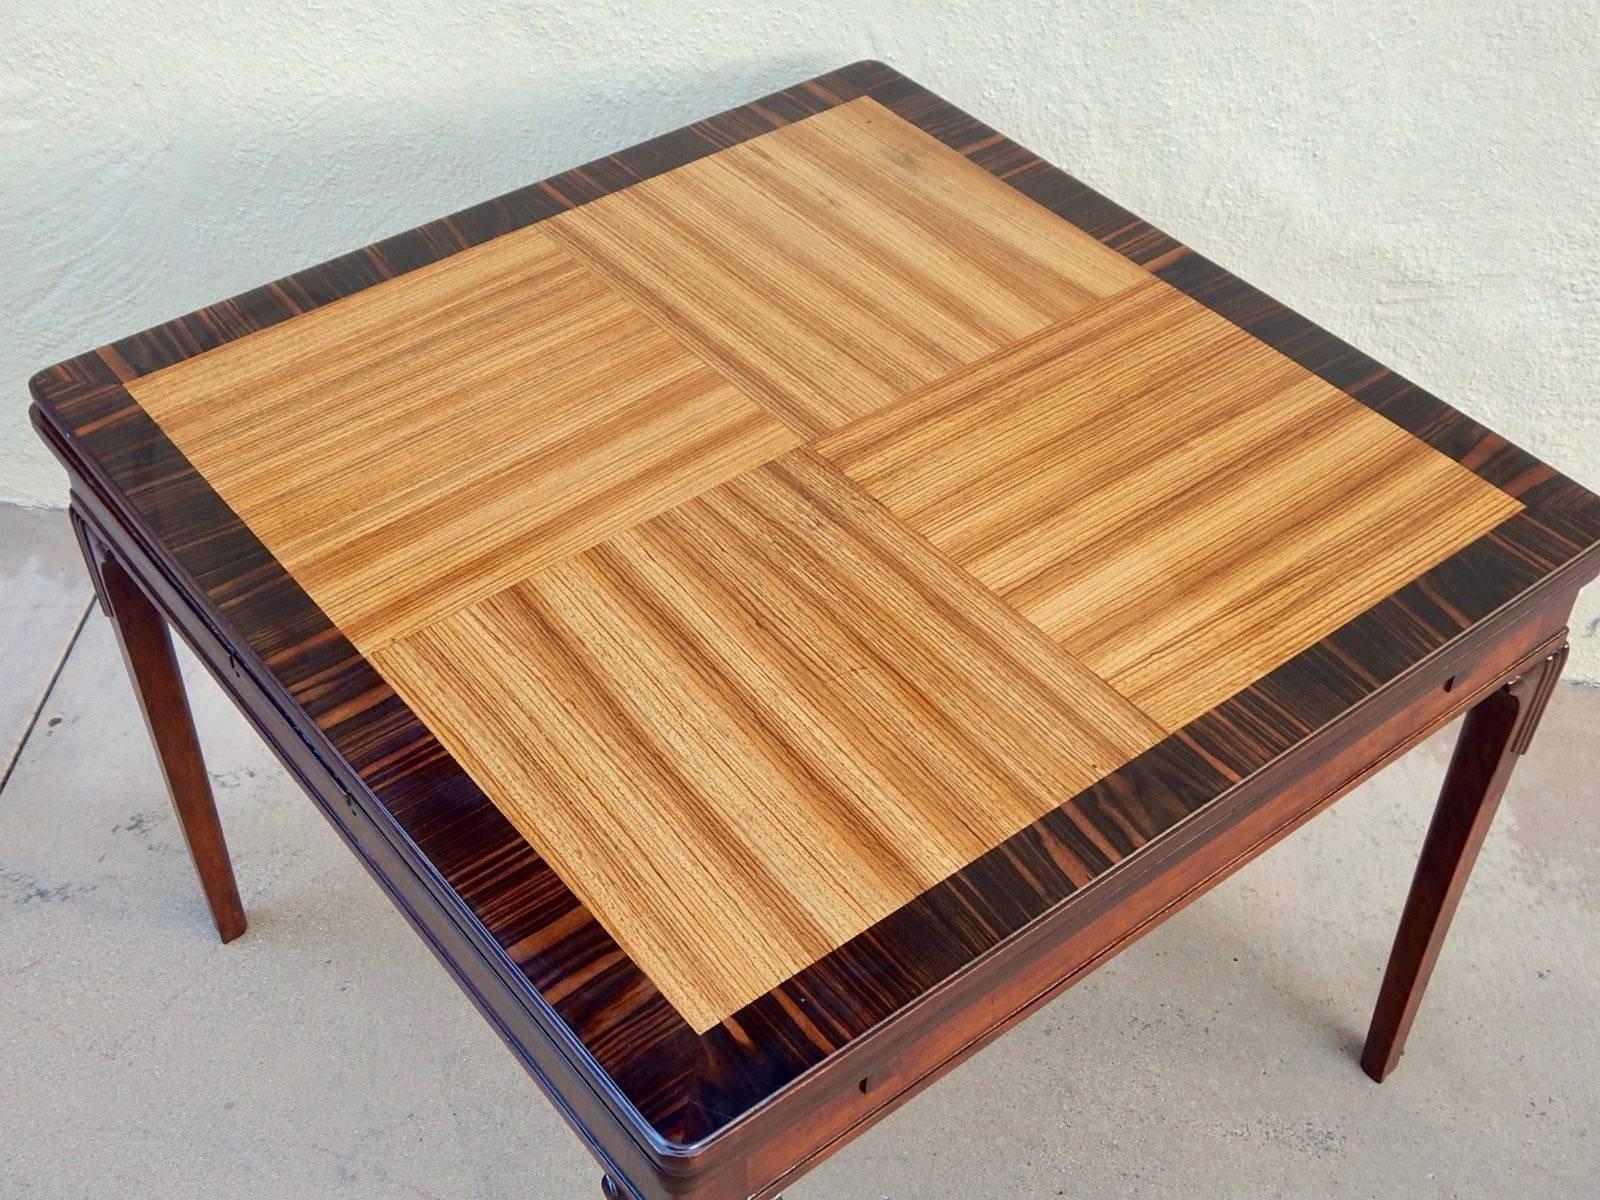 Swedish Art Deco Extendible Side Table by Eric Chambert, circa 1930 In Excellent Condition For Sale In Richmond, VA